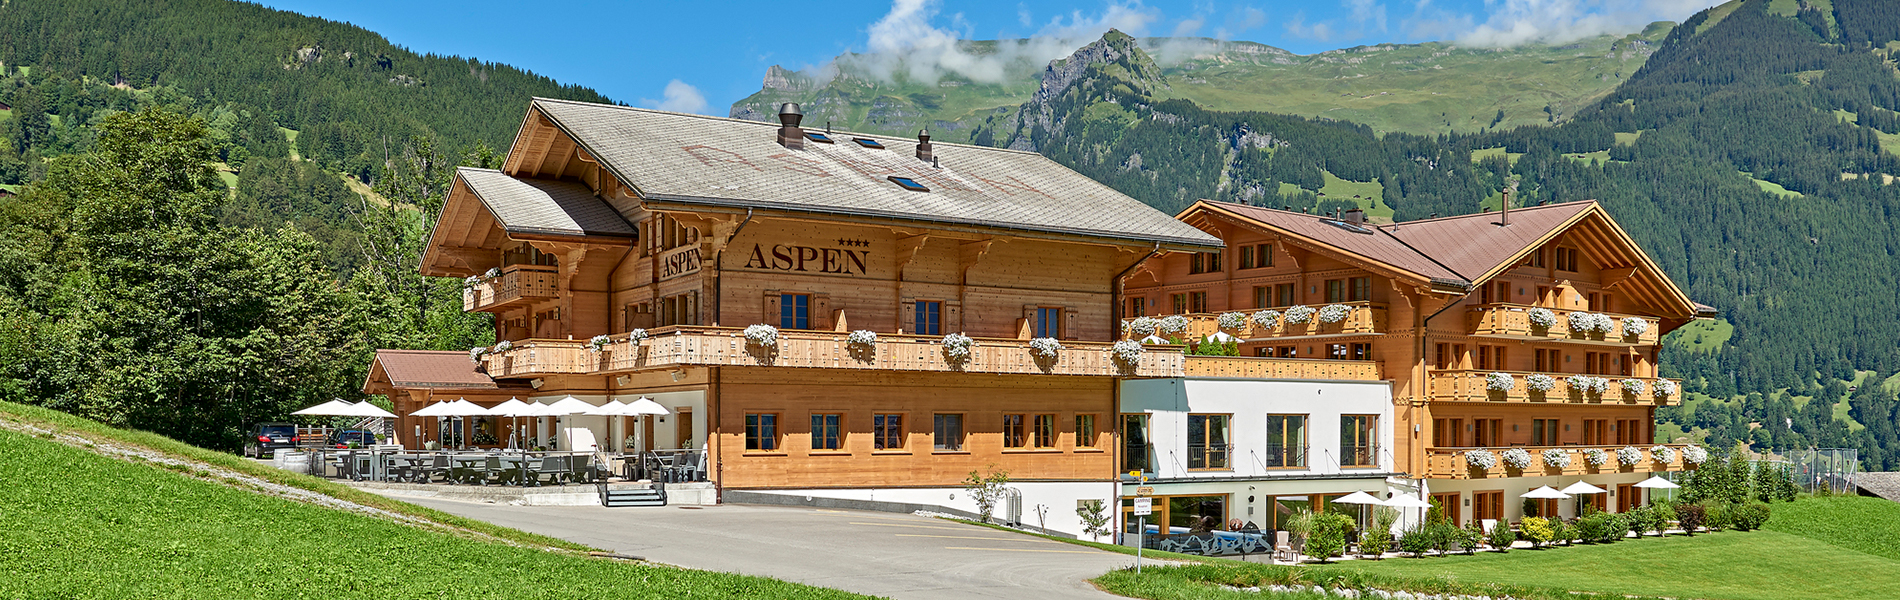 ASPEN alpin lifestyle Hotel exterior by the Alps